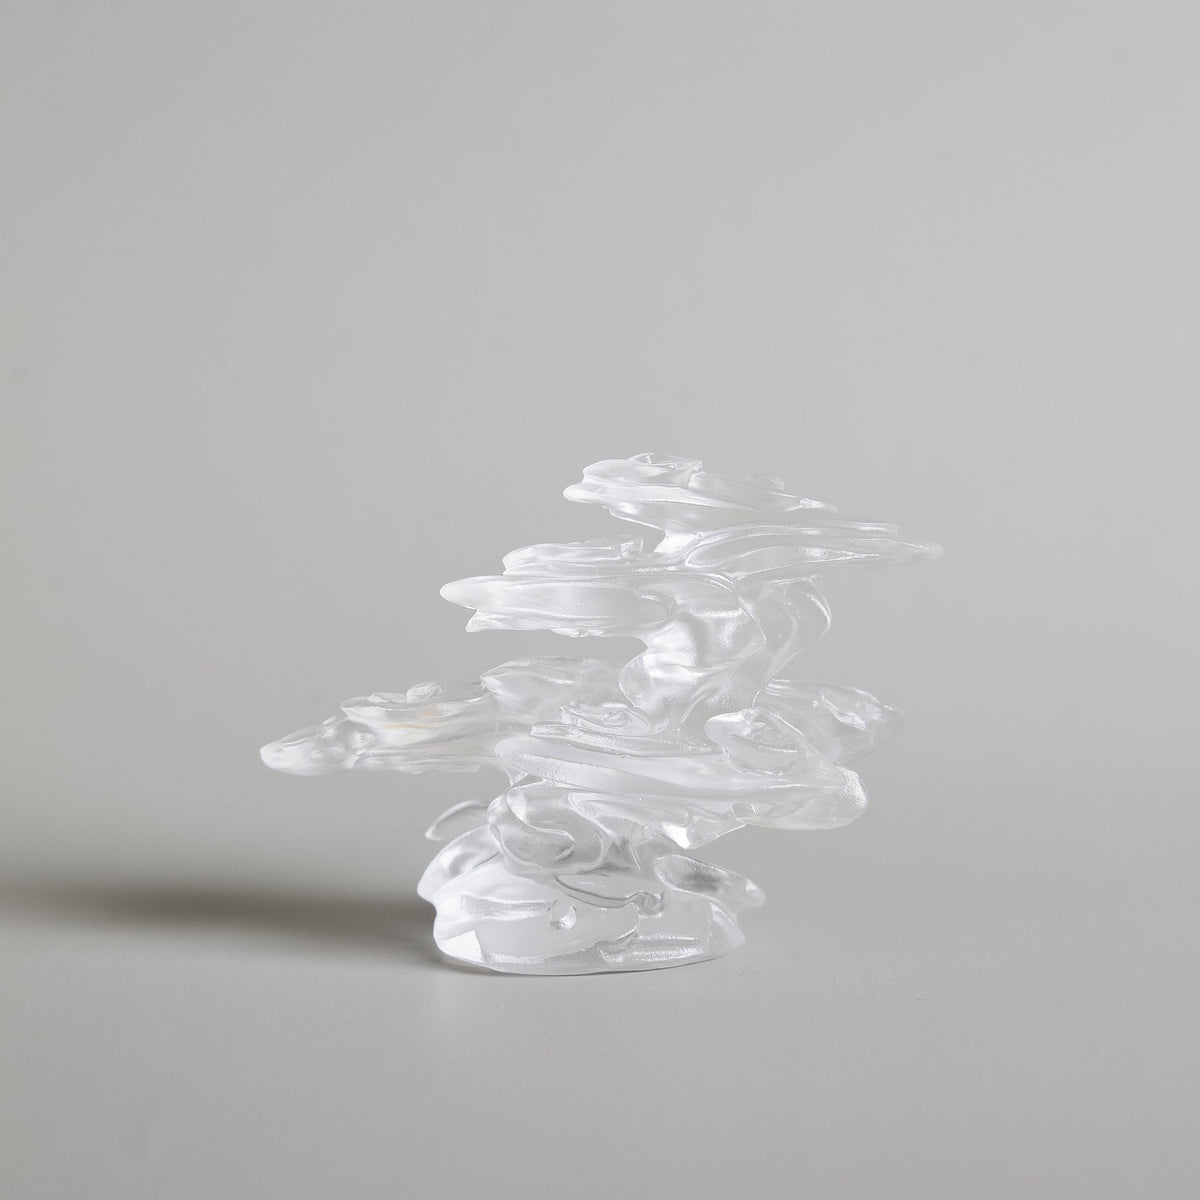 Side view of Ethereal Clouds liuli glass incense burner